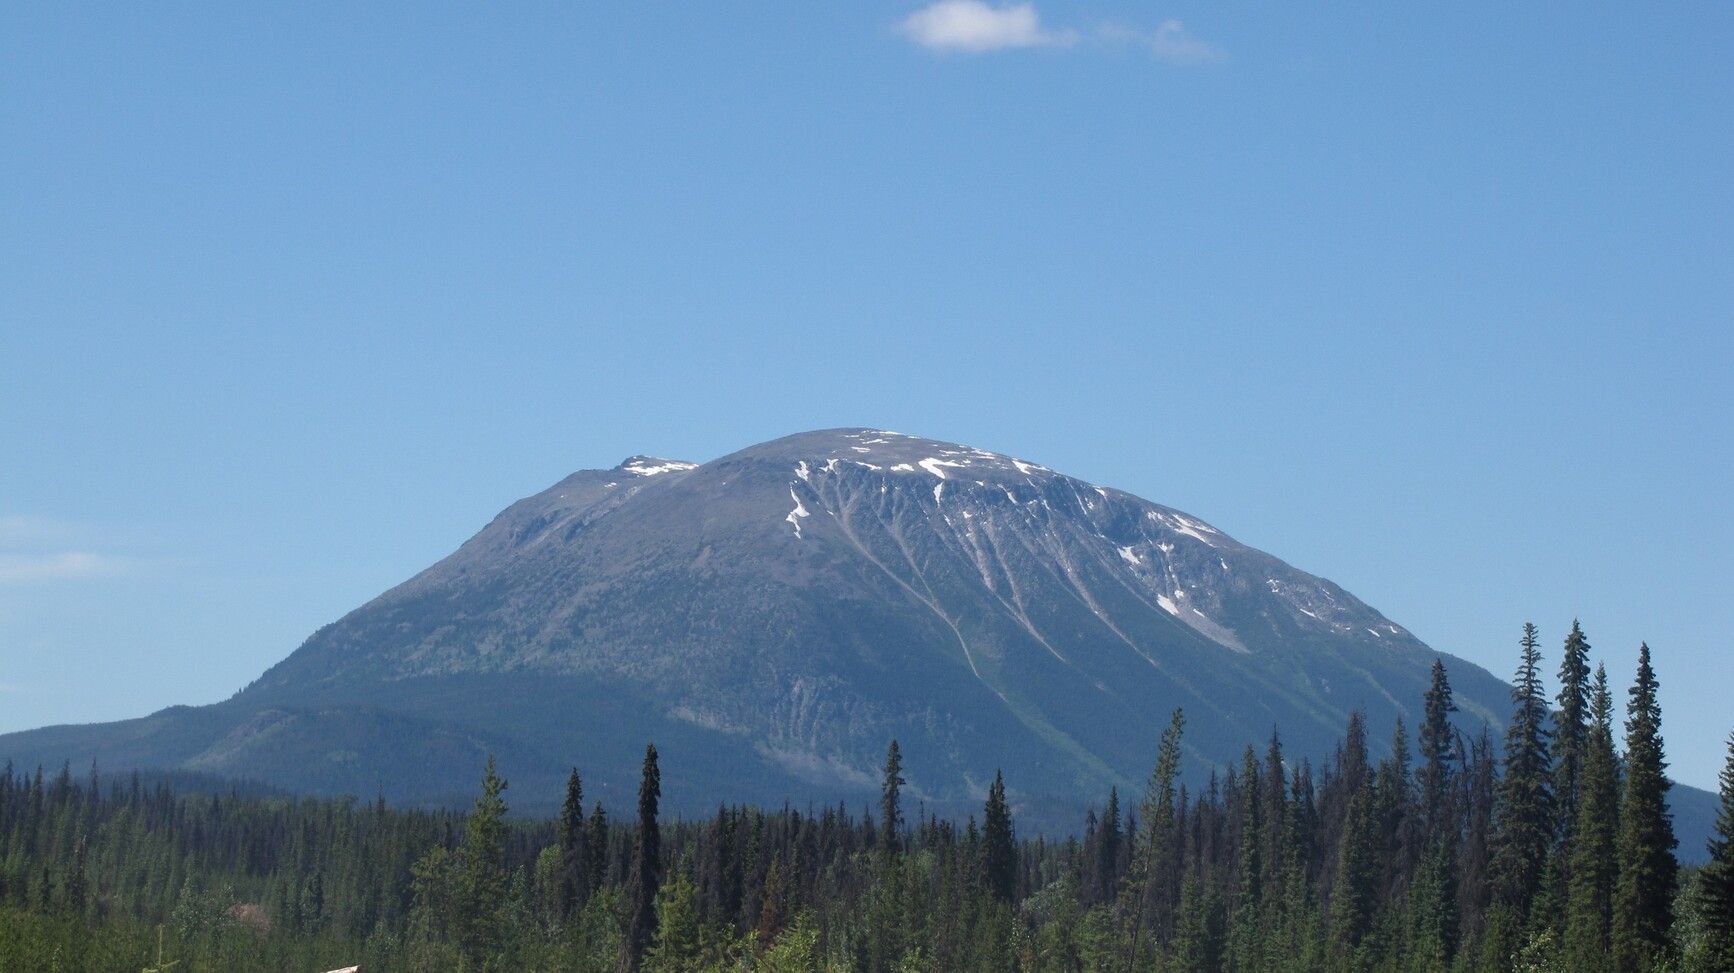 Nadina Mountain from a distance.